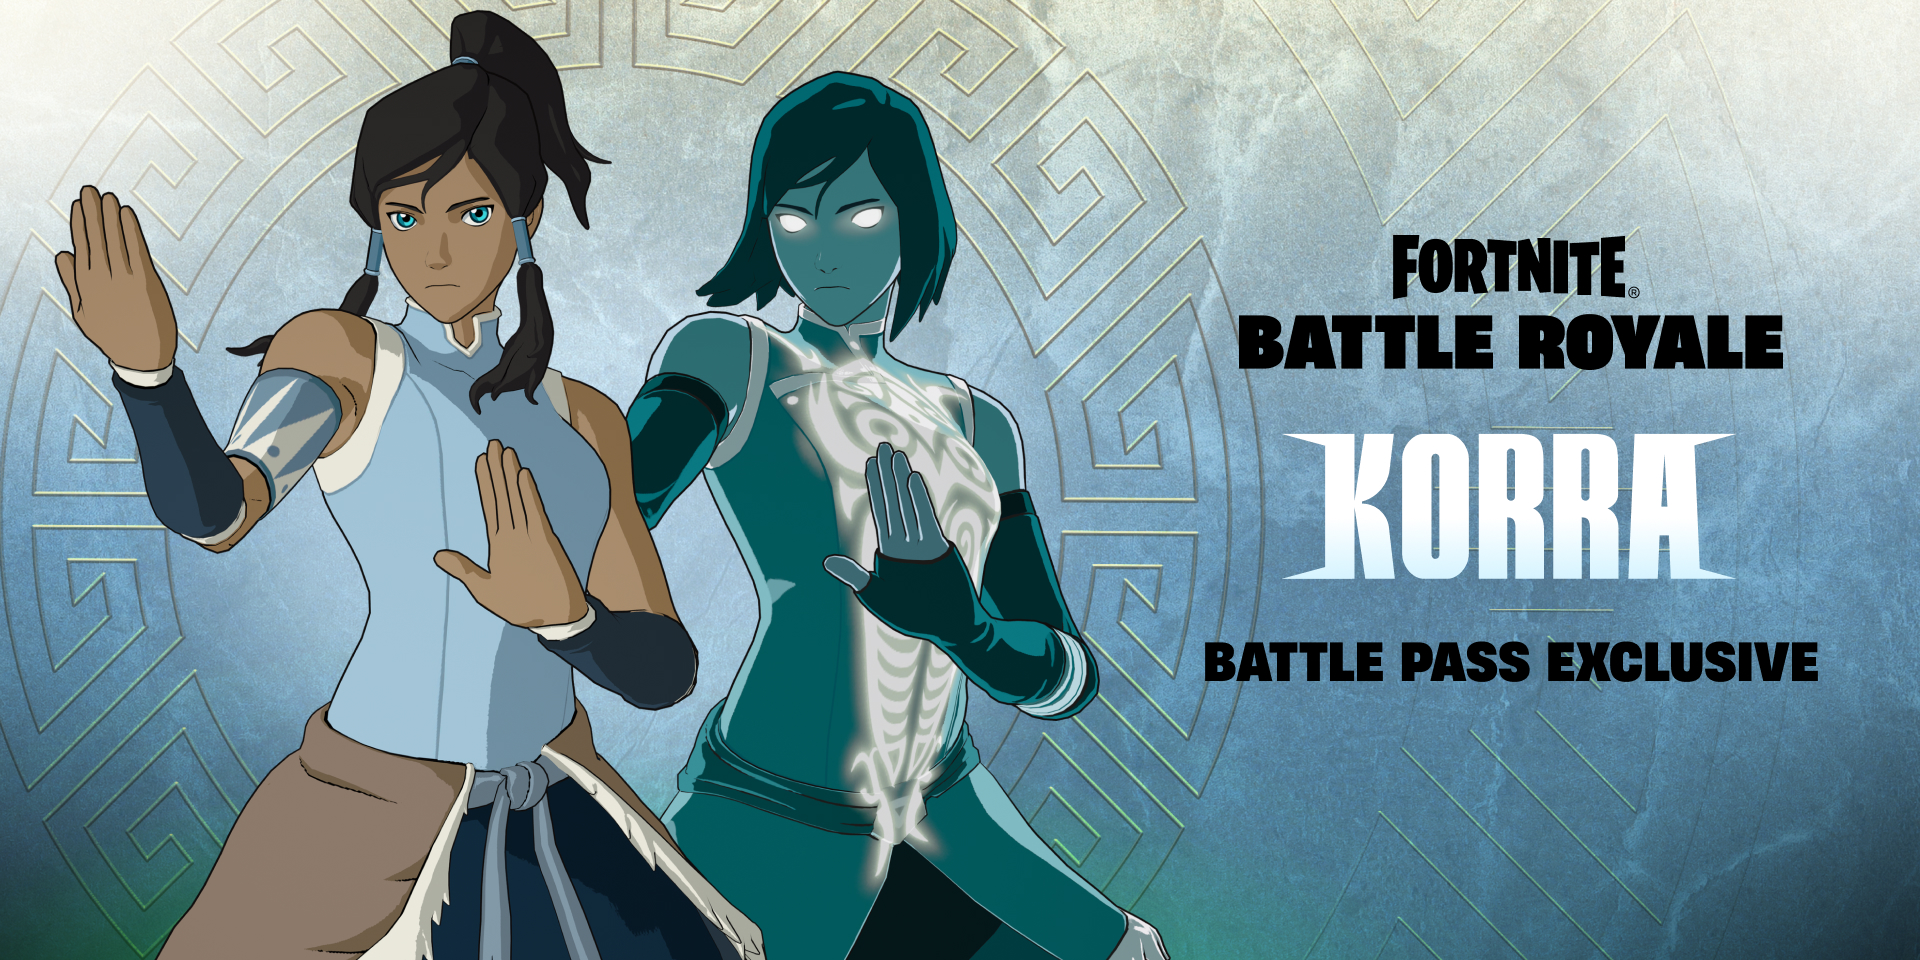 korra and her style in fortnite